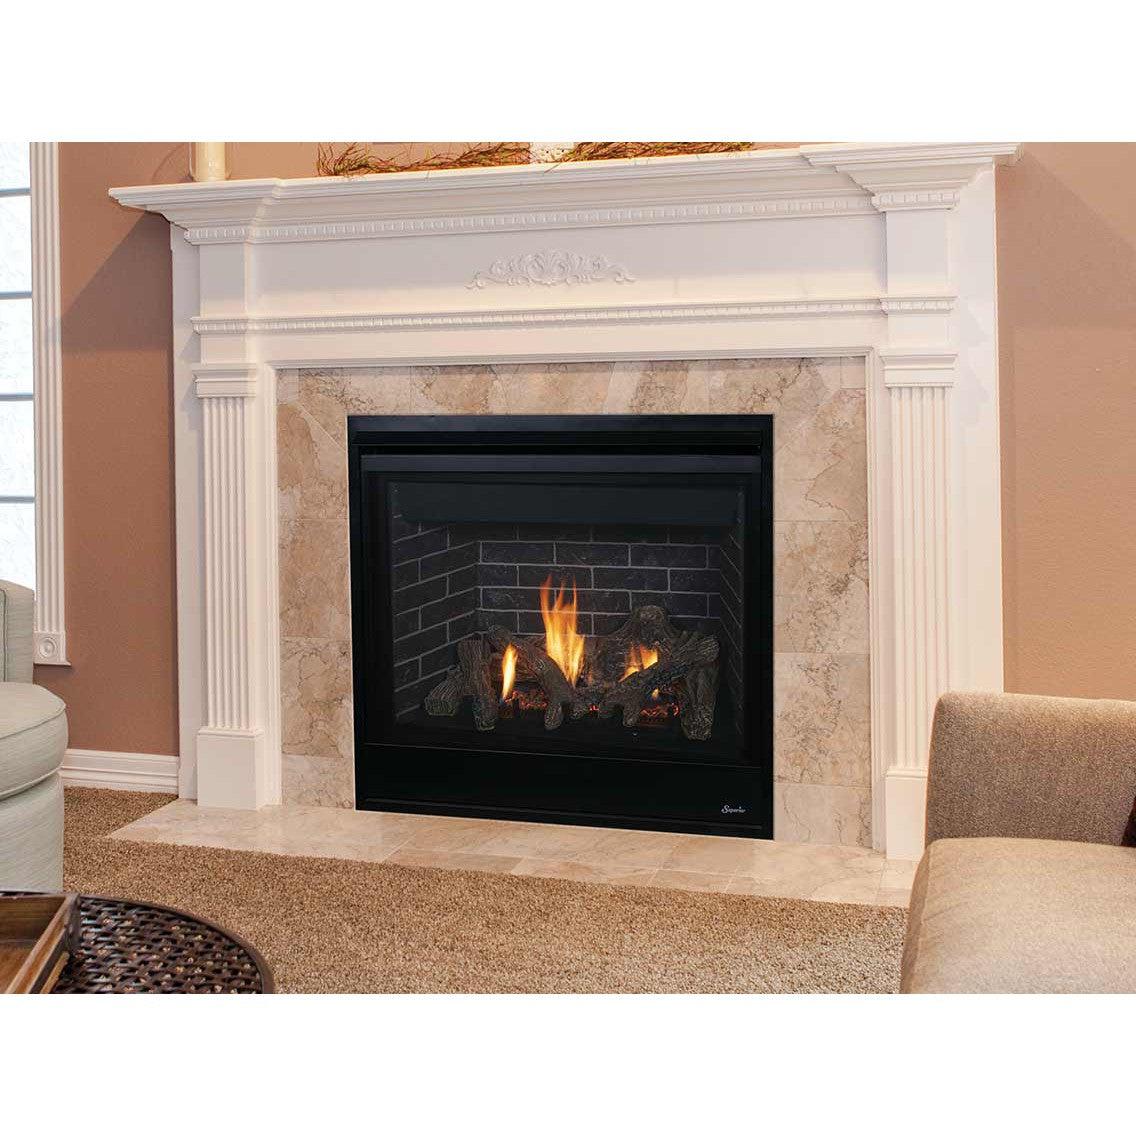 Superior DRT3035 35" Traditional Direct Top/Rear Vent Propane Gas Fireplace With Millivolt Ignition